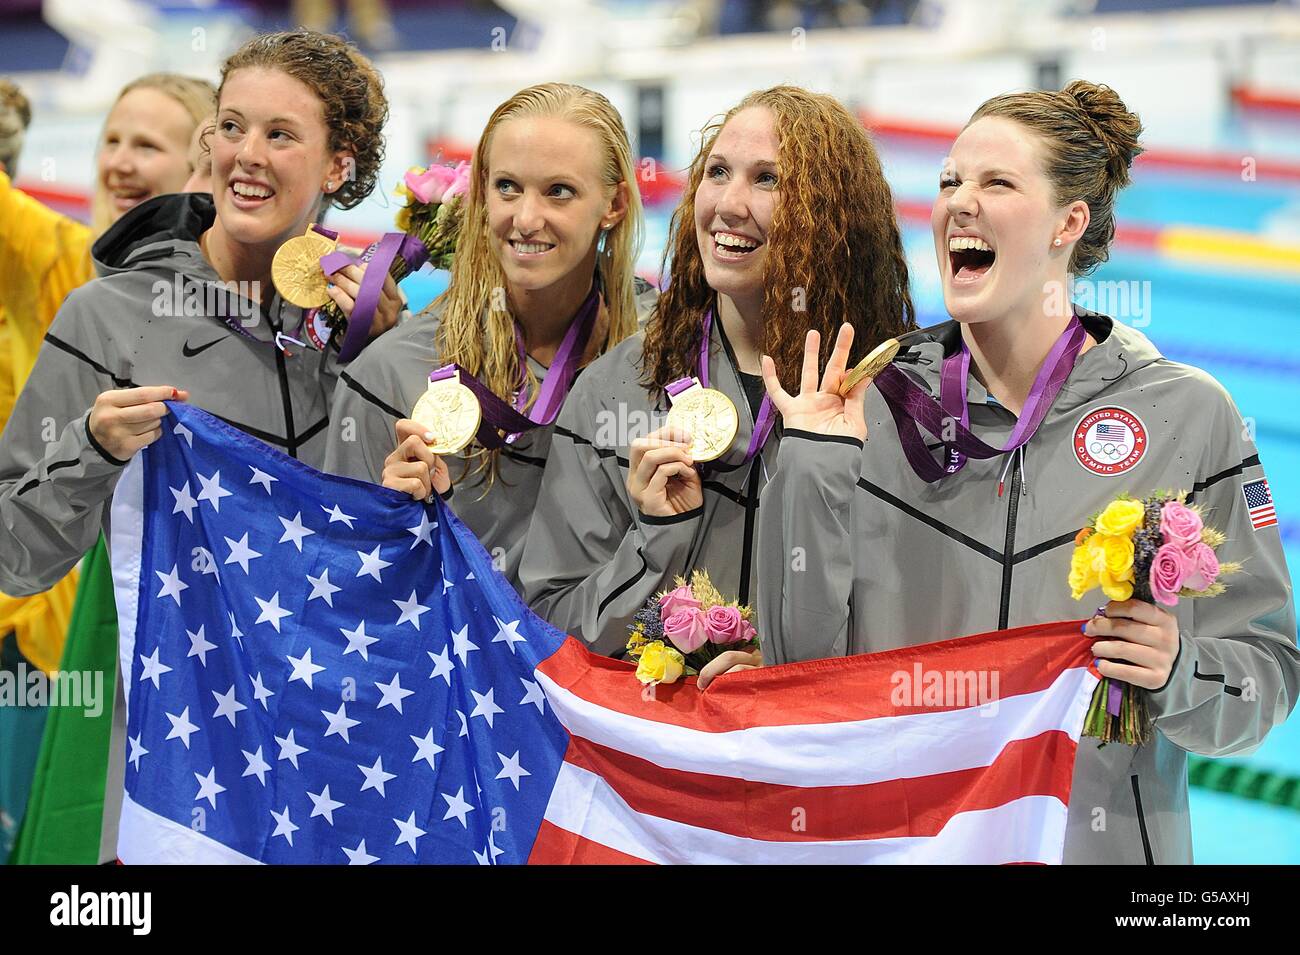 The USA team of Allison Schmidt, Dana Vollmer, Shannon Vreeland and Missy Franklin (left to right) celebrate their Gold medal place in the Women's 4 x 200m Freestyle Relay Final Stock Photo